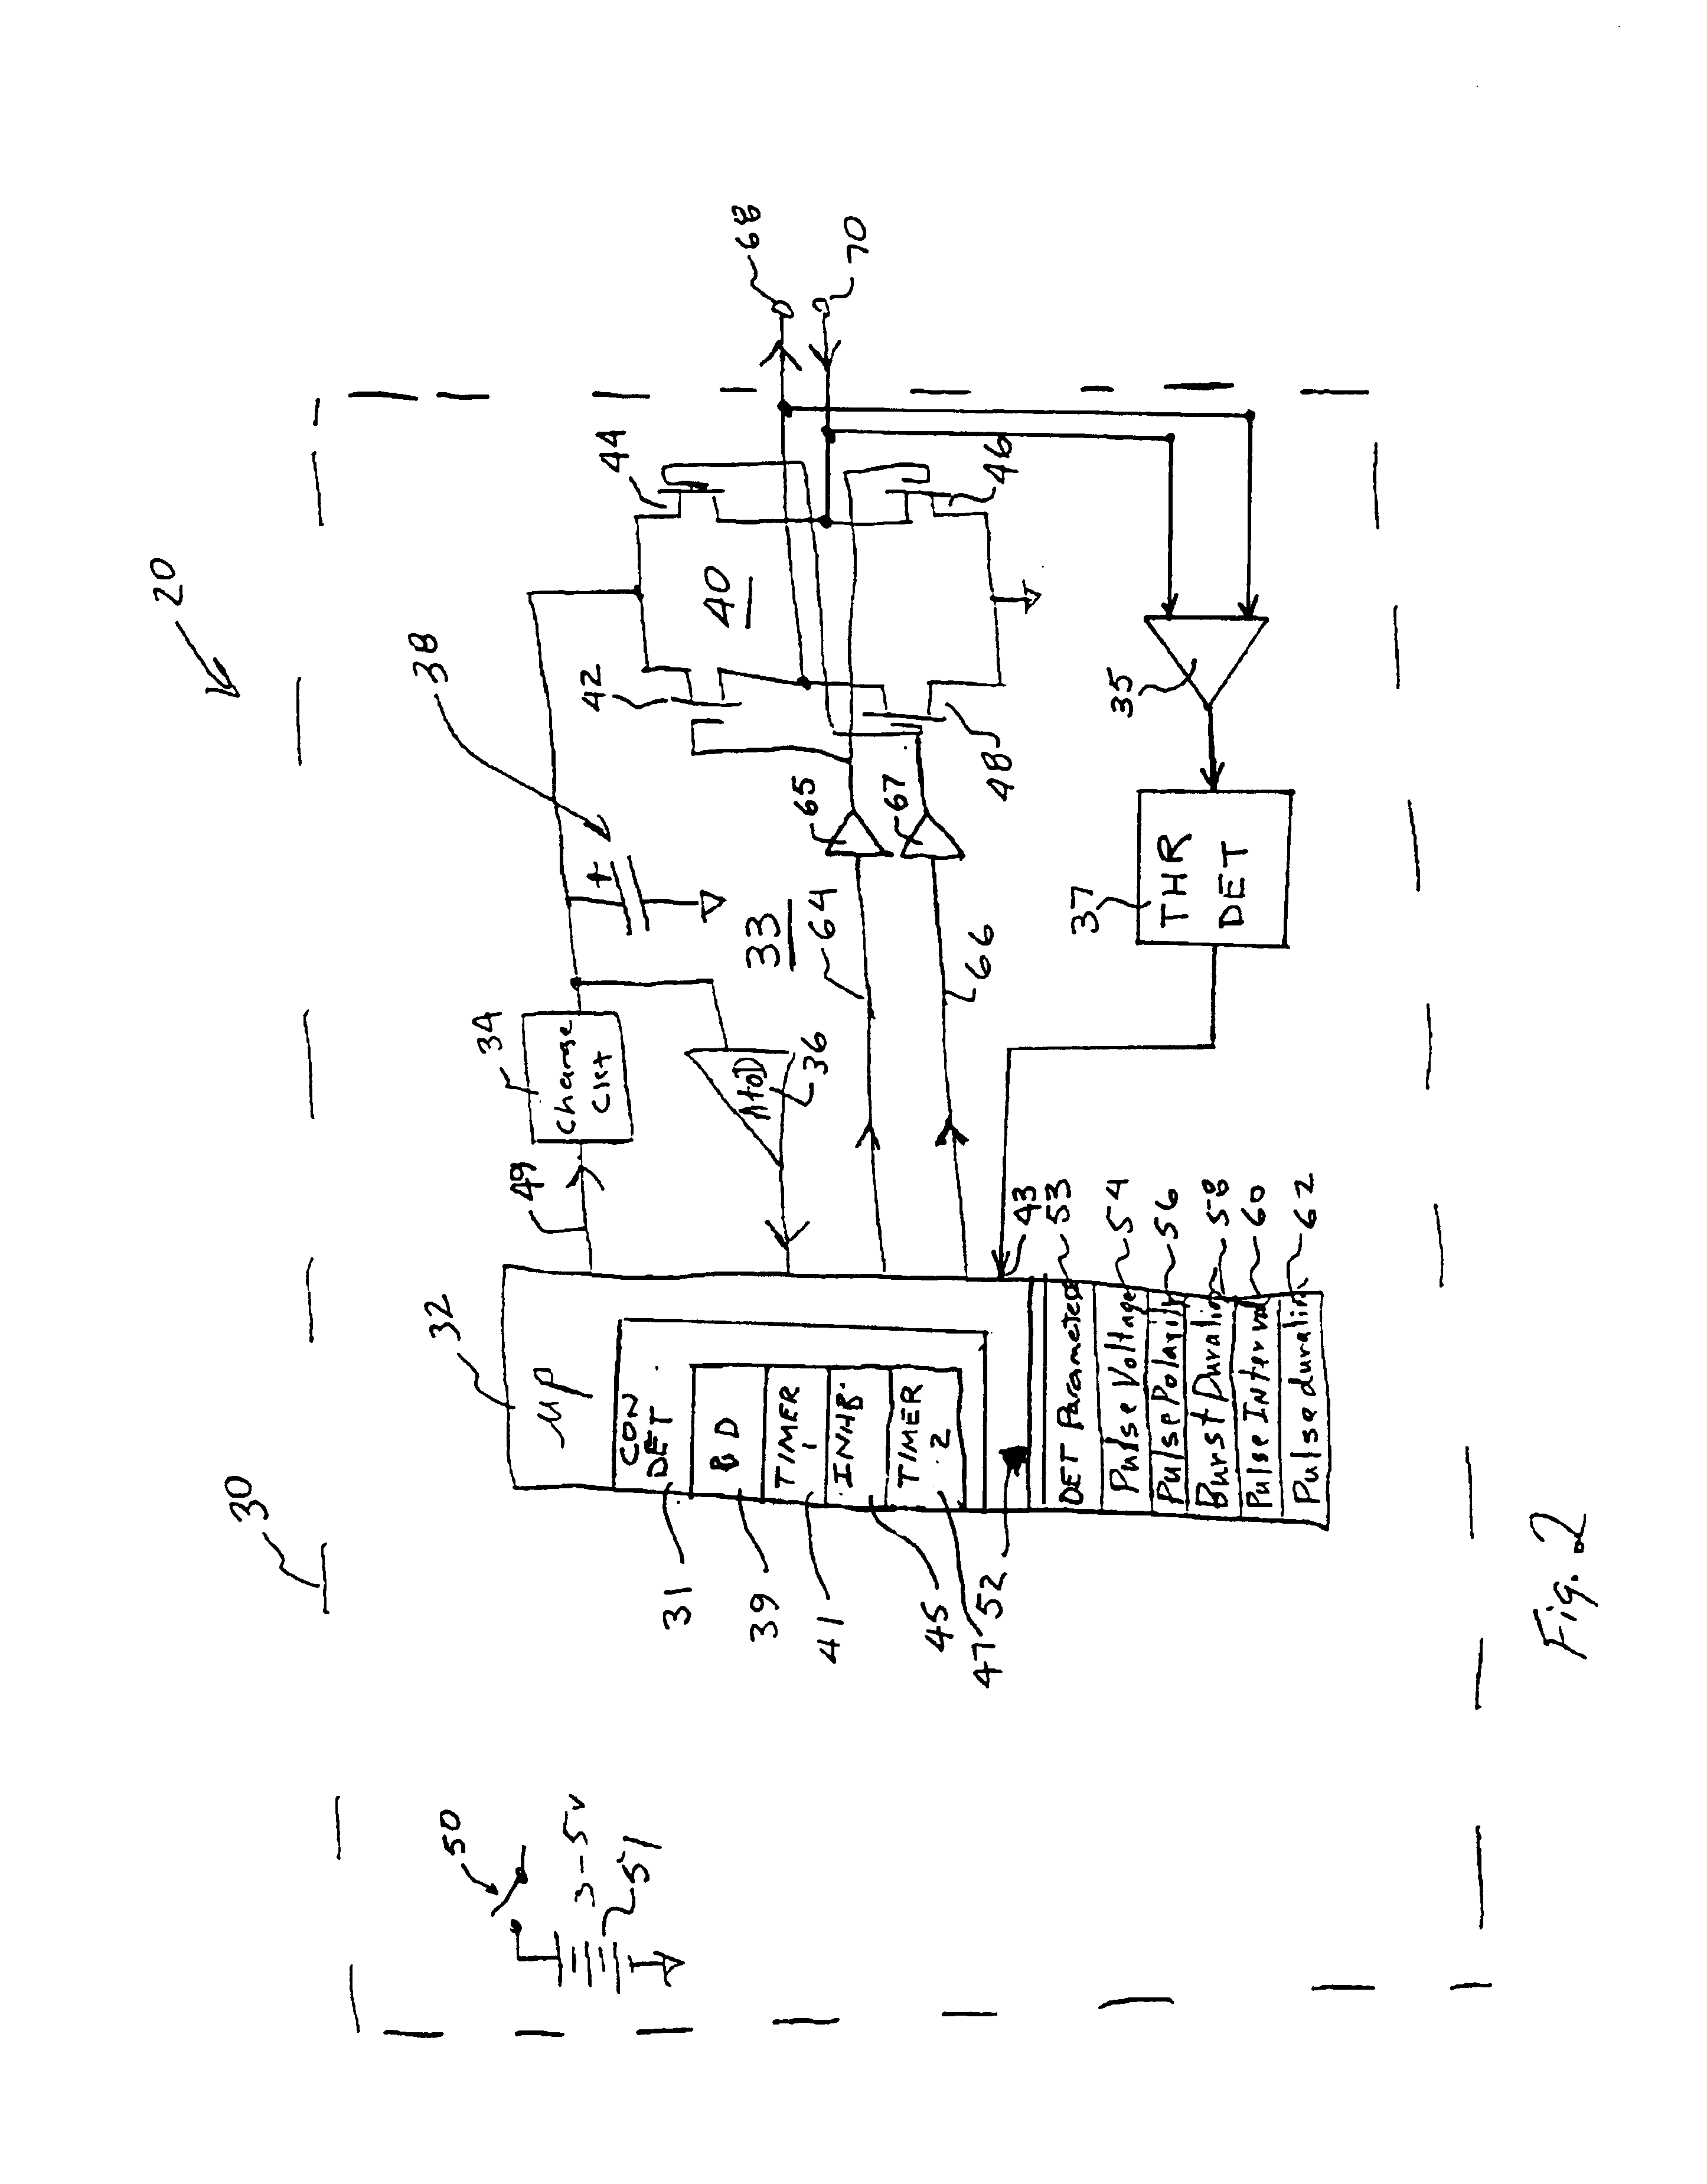 Uterine contraction detection and initiation system and method